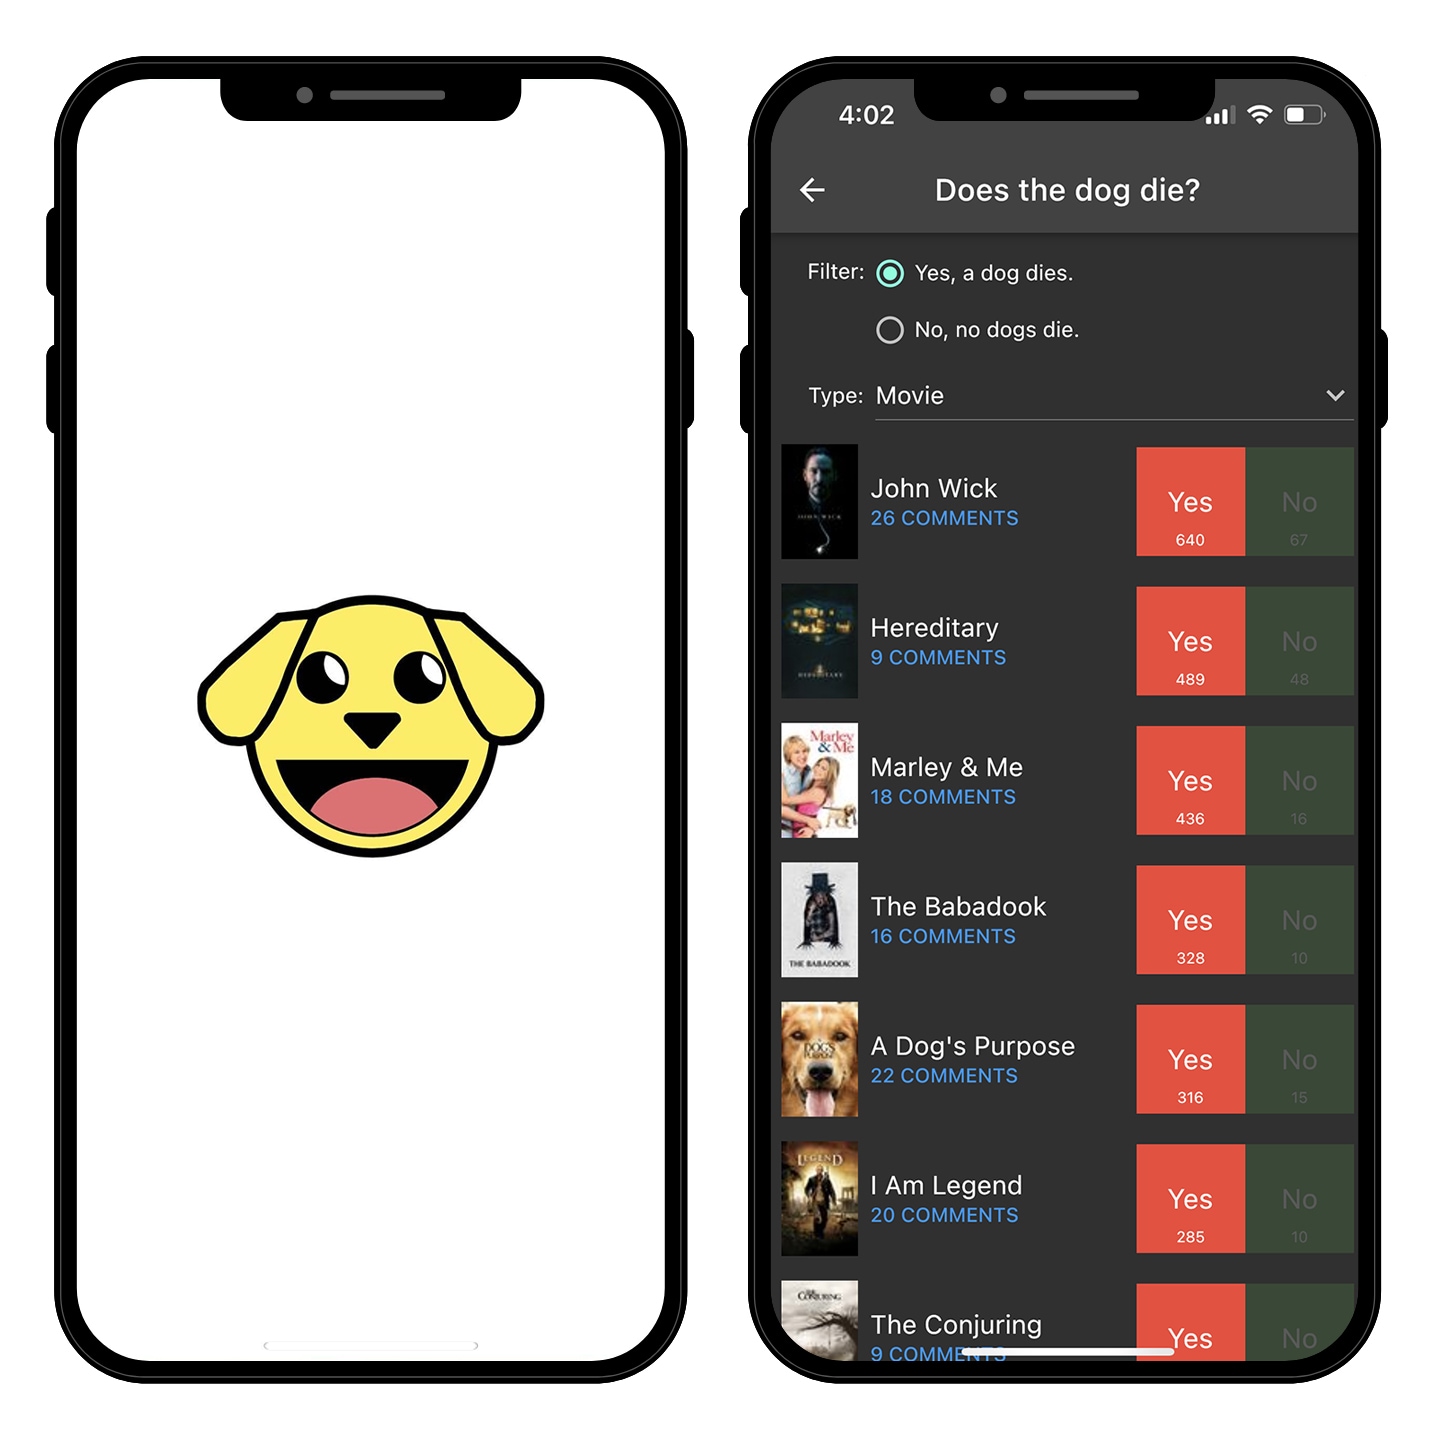 DoesTheDogDie app